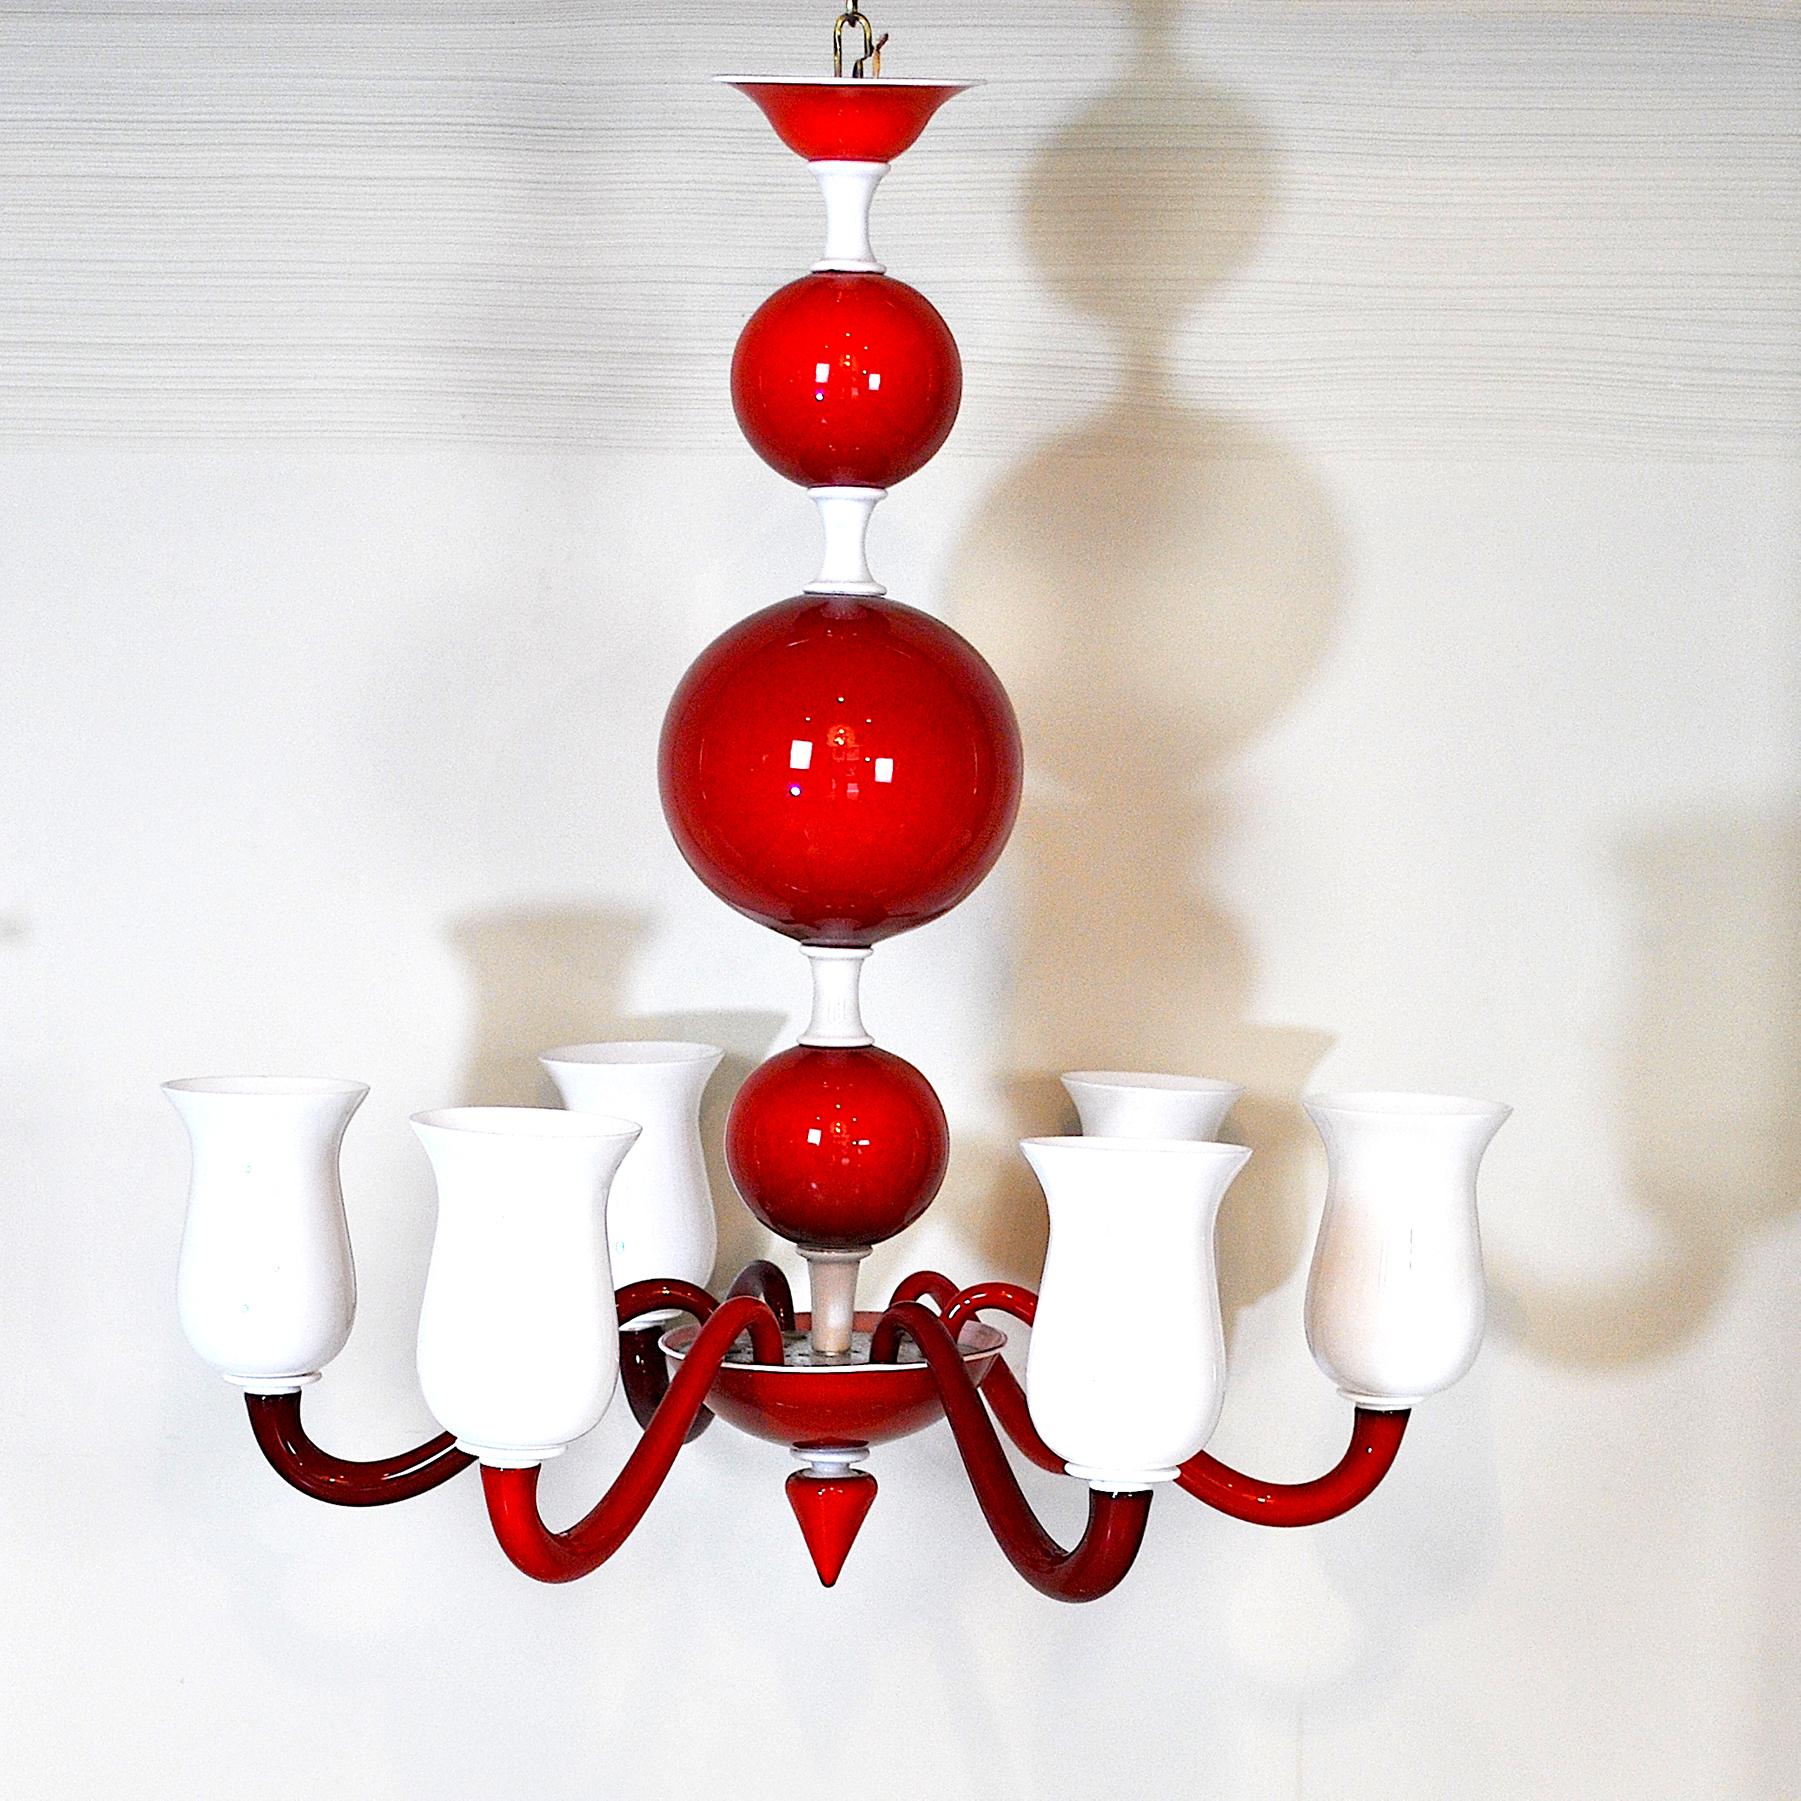 Mid-Century Modern Venini Suspension Lamp a Variant of Model N. 99.41 Gio Ponti For Sale